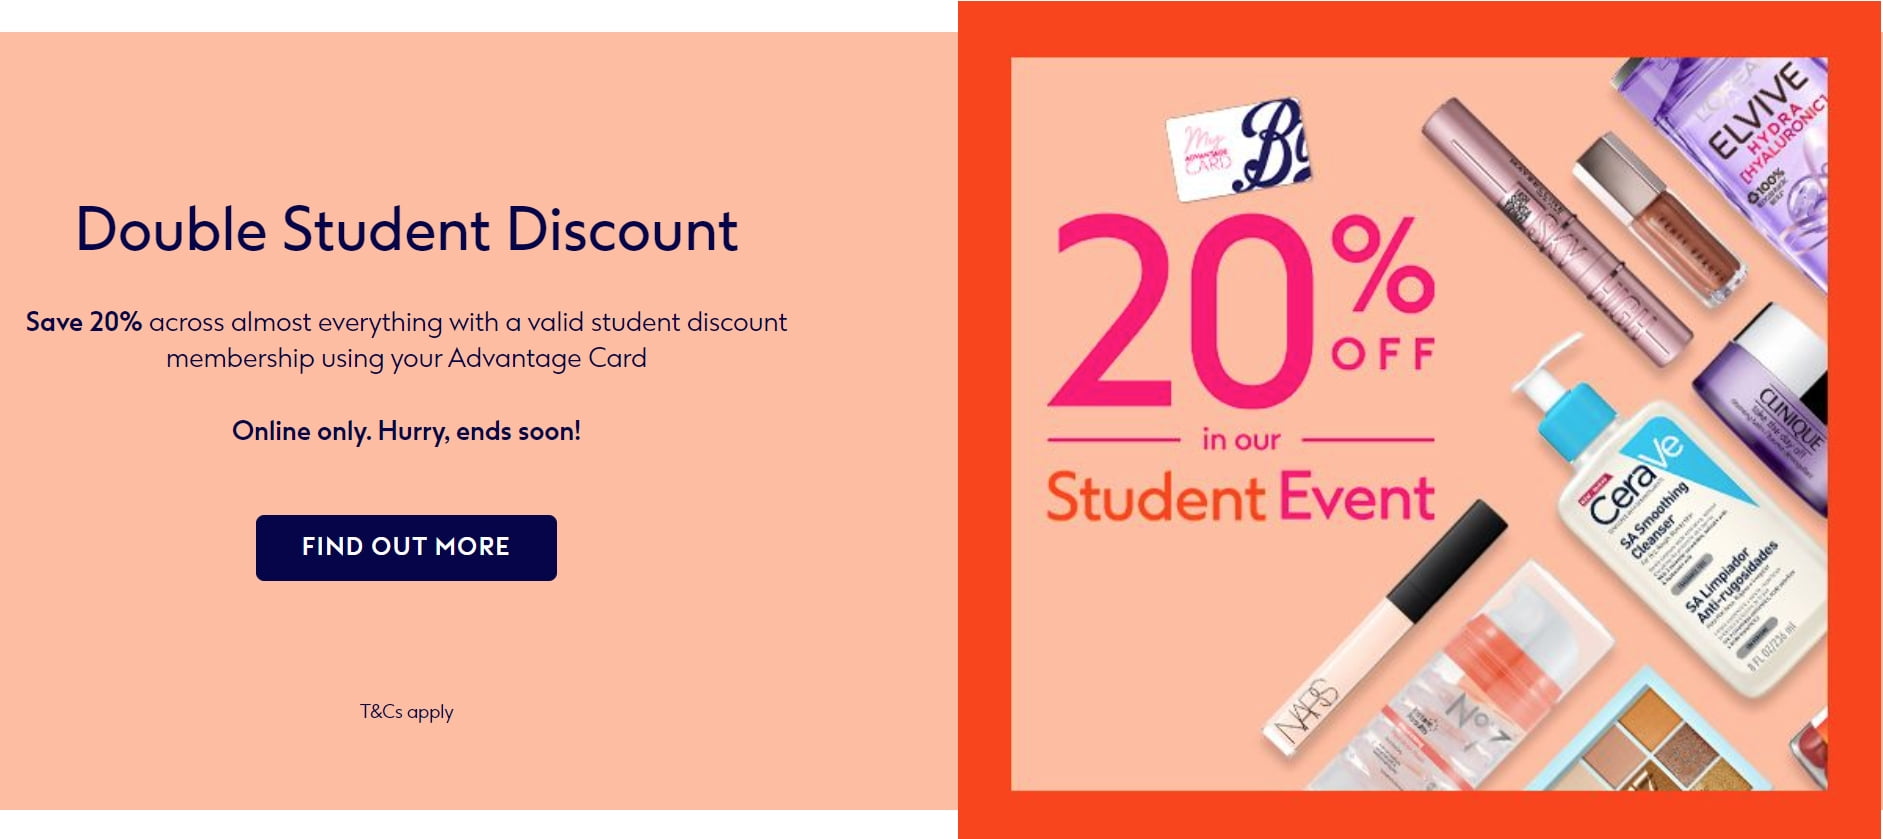 Offers at Boots